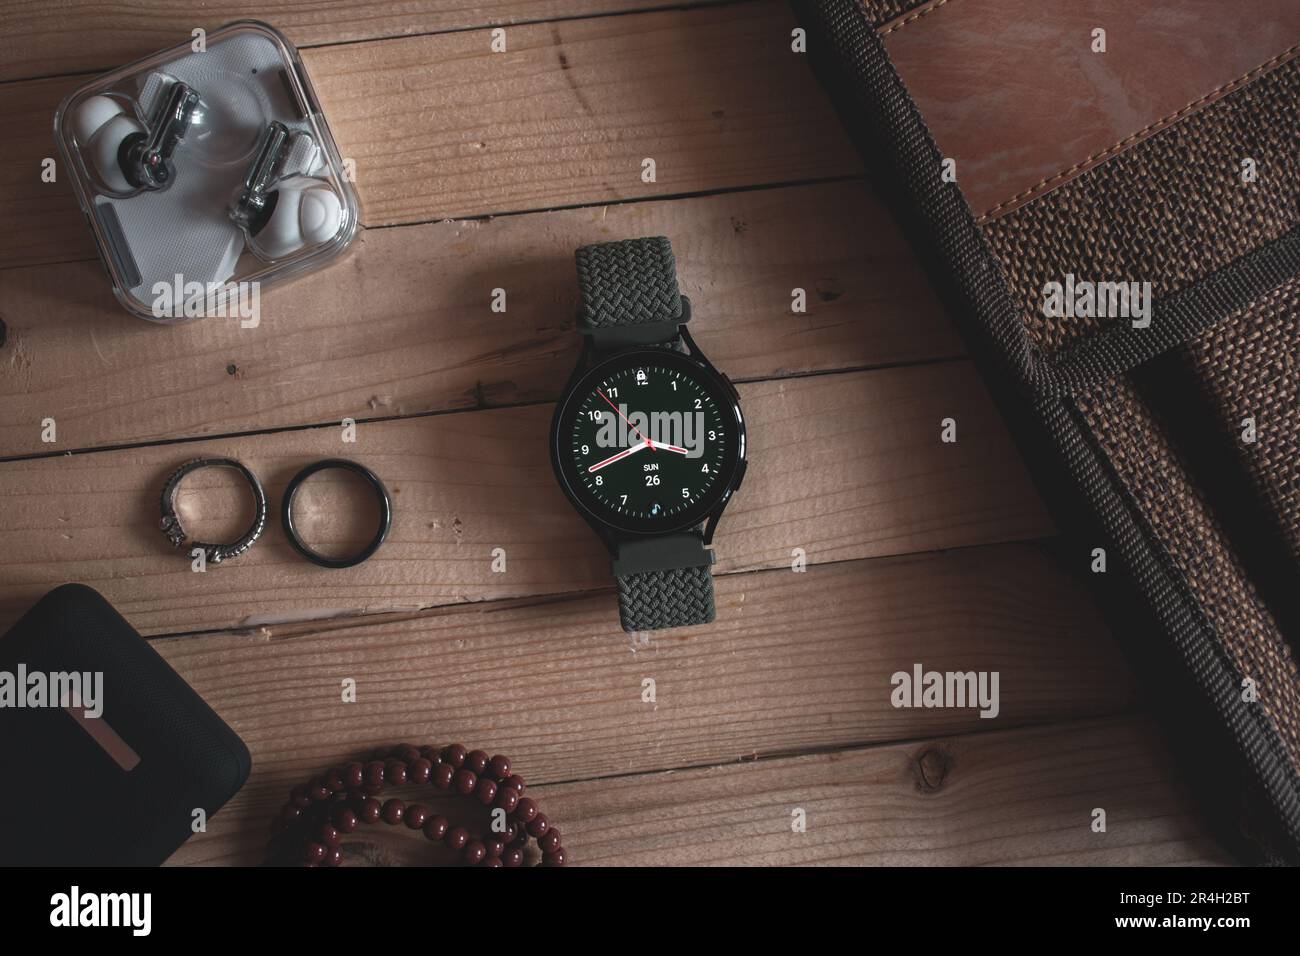 Abstract Watches Store Image & Photo (Free Trial) | Bigstock